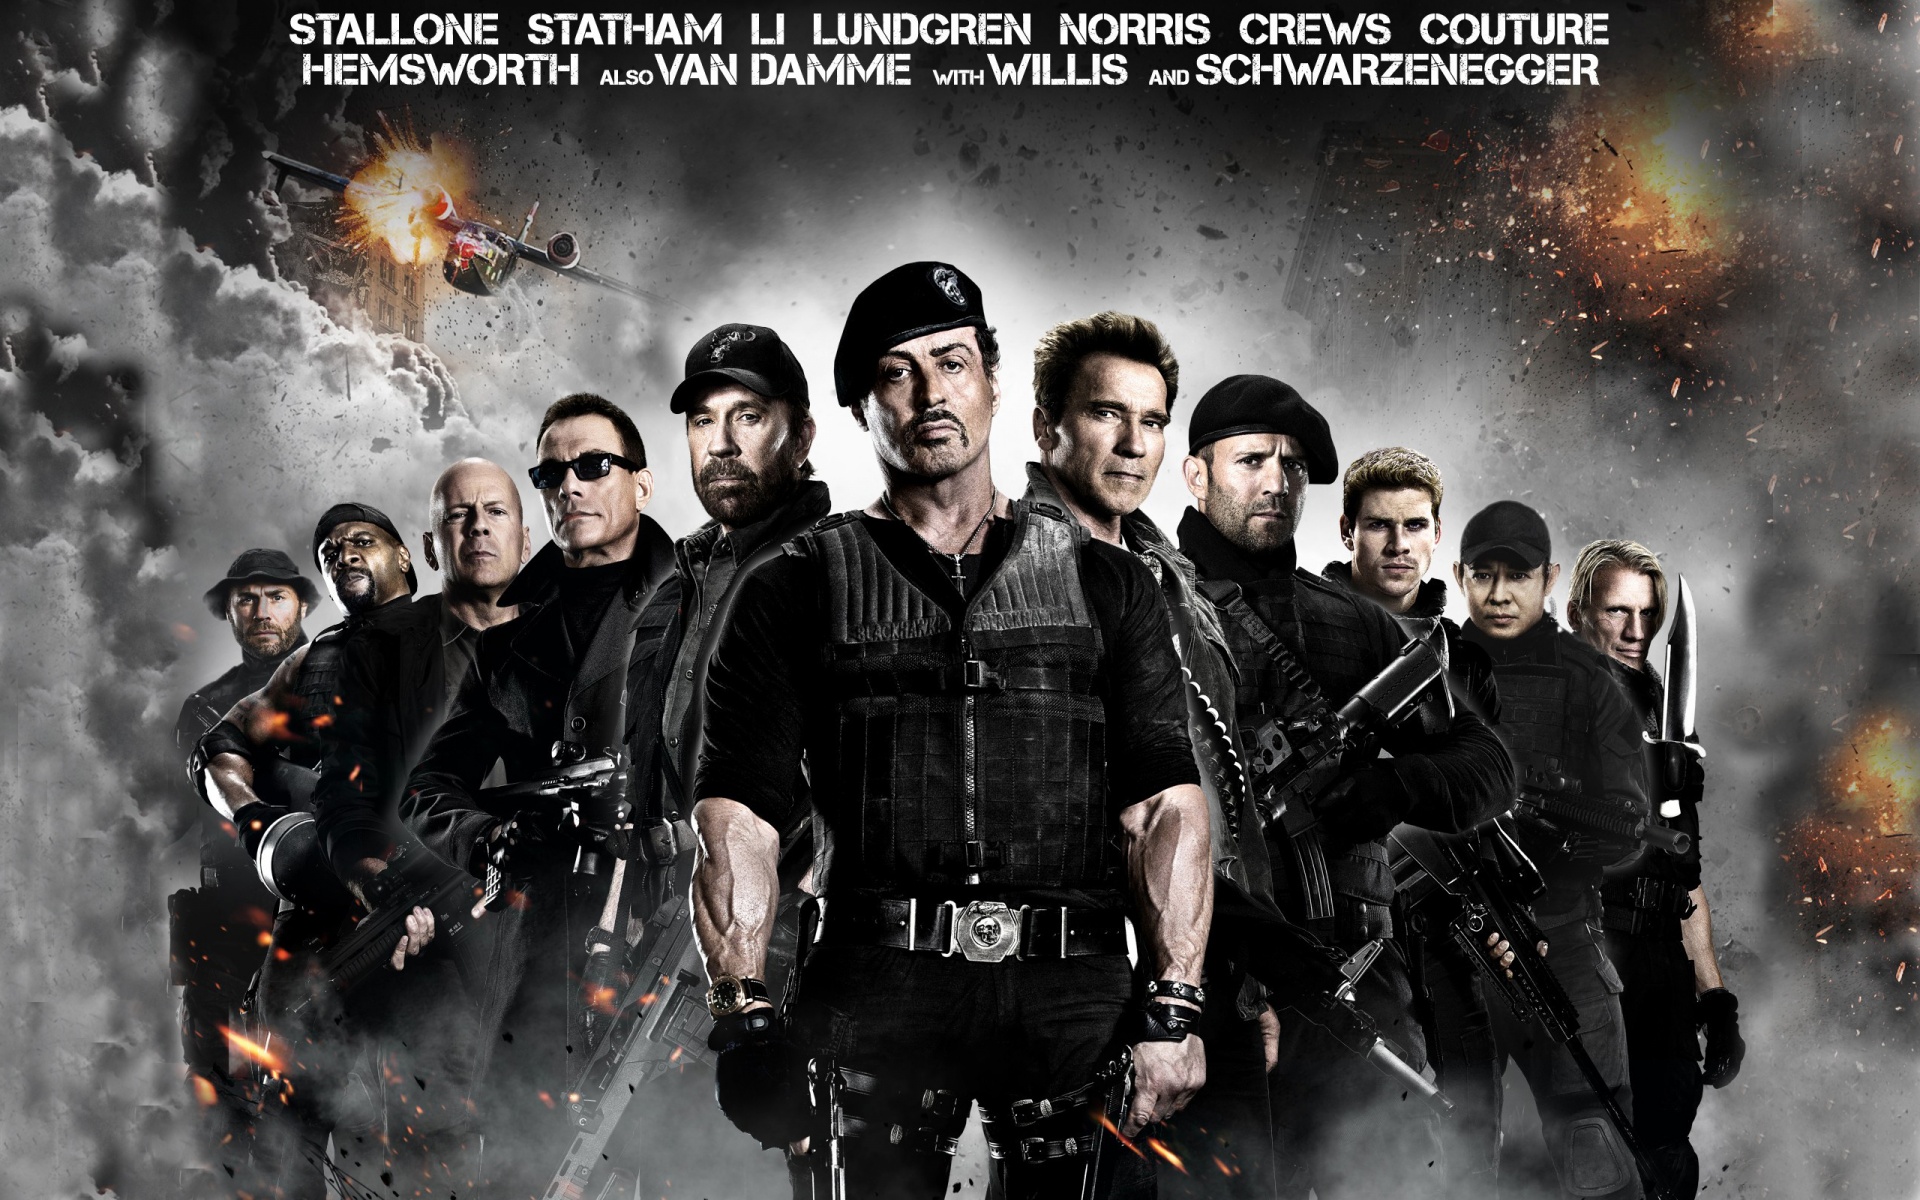 the expendables, movie, the expendables 2, arnold schwarzenegger, barney ross, billy (the expendables), booker (the expendables), bruce willis, chuck norris, church (the expendables), dolph lundgren, gunnar jensen, hale caesar, jason statham, jean claude van damme, jet li, lee christmas, liam hemsworth, randy couture, sylvester stallone, terry crews, toll road, trench (the expendables), vilain (the expendables), yin yang (the expendables)